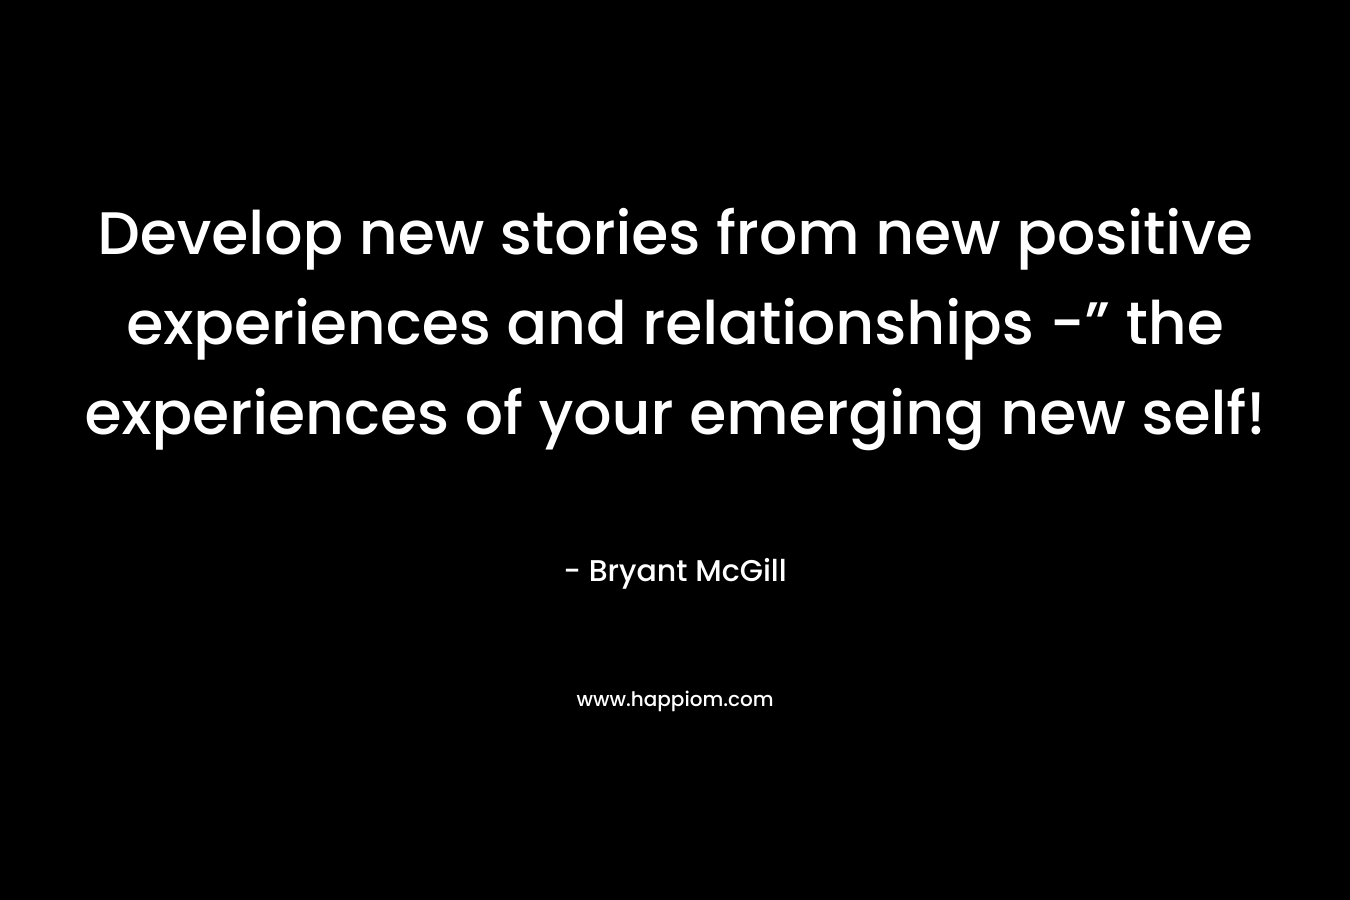 Develop new stories from new positive experiences and relationships -” the experiences of your emerging new self!